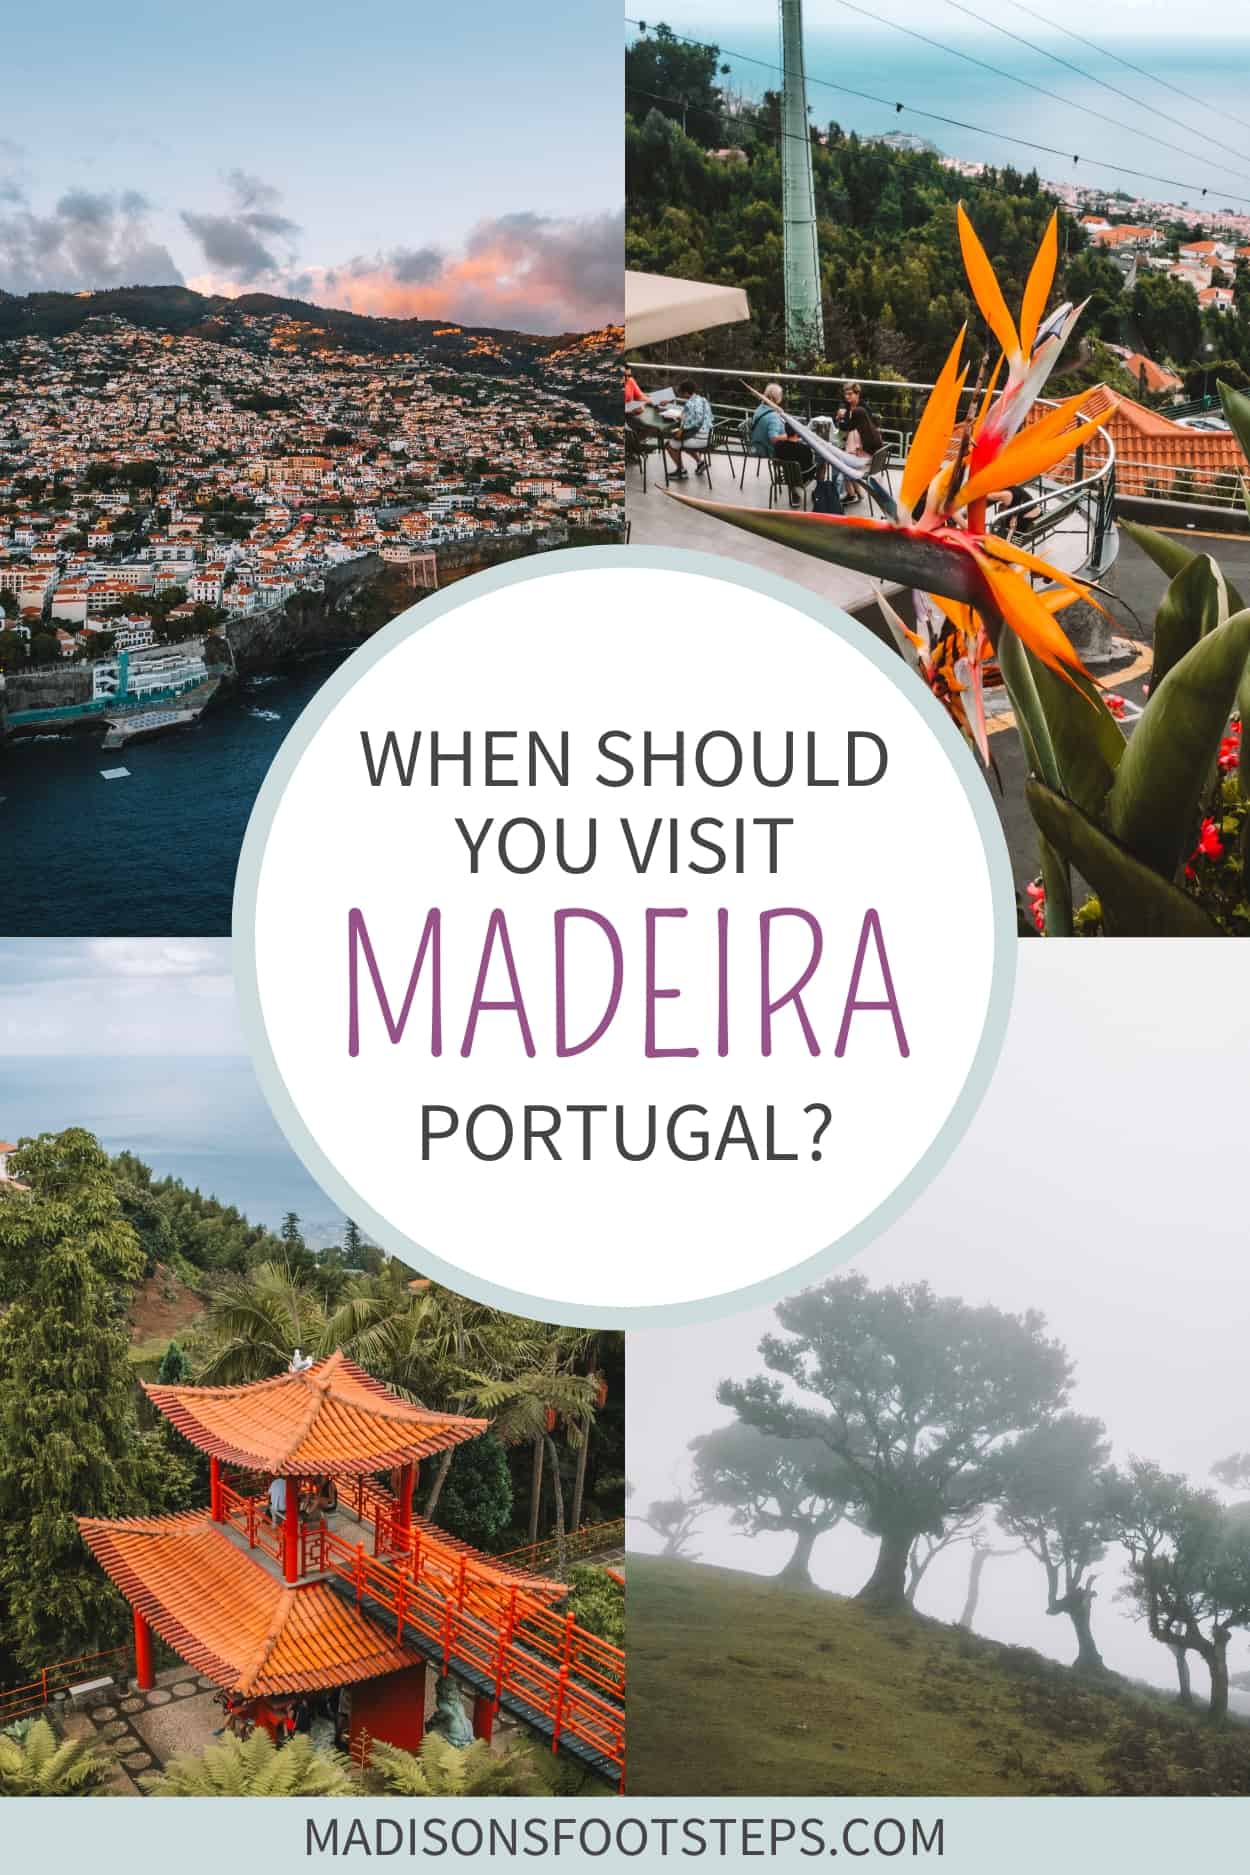 Pinterest image for the best time to visit Madeira blog post.